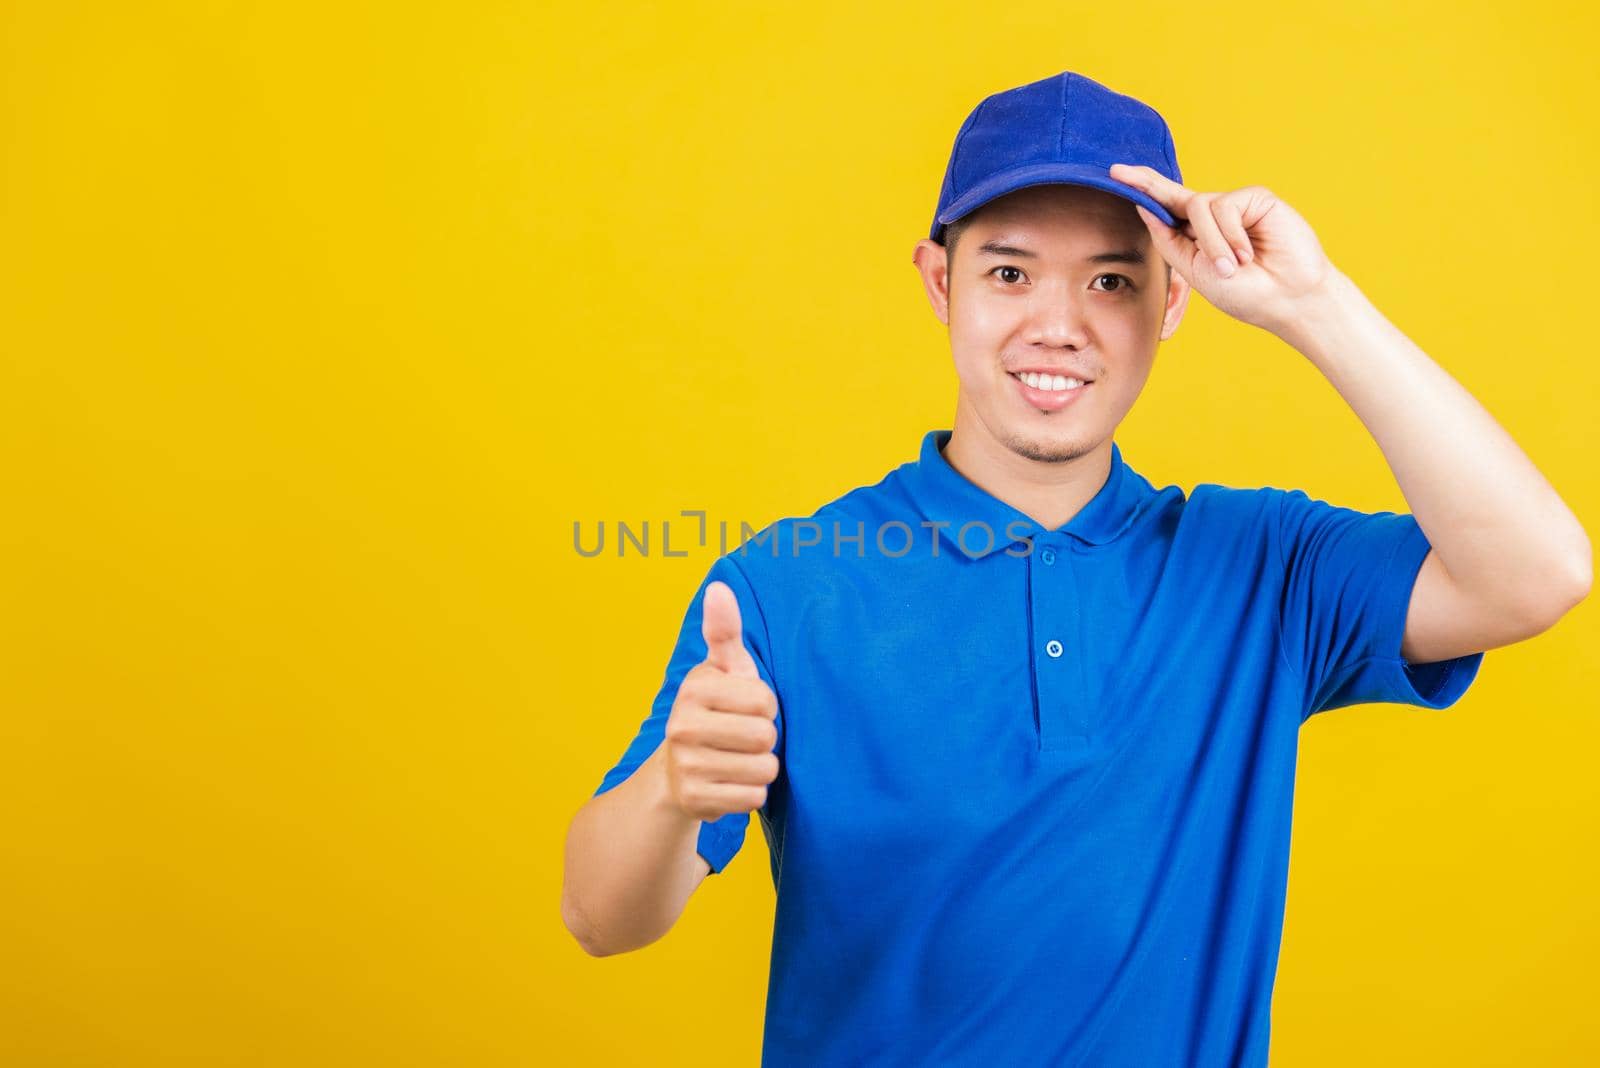 Portrait professional attractive delivery happy man standing he smile wearing blue t-shirt and cap uniform showing thumb up gesture looking to camera, studio shot isolated on yellow background